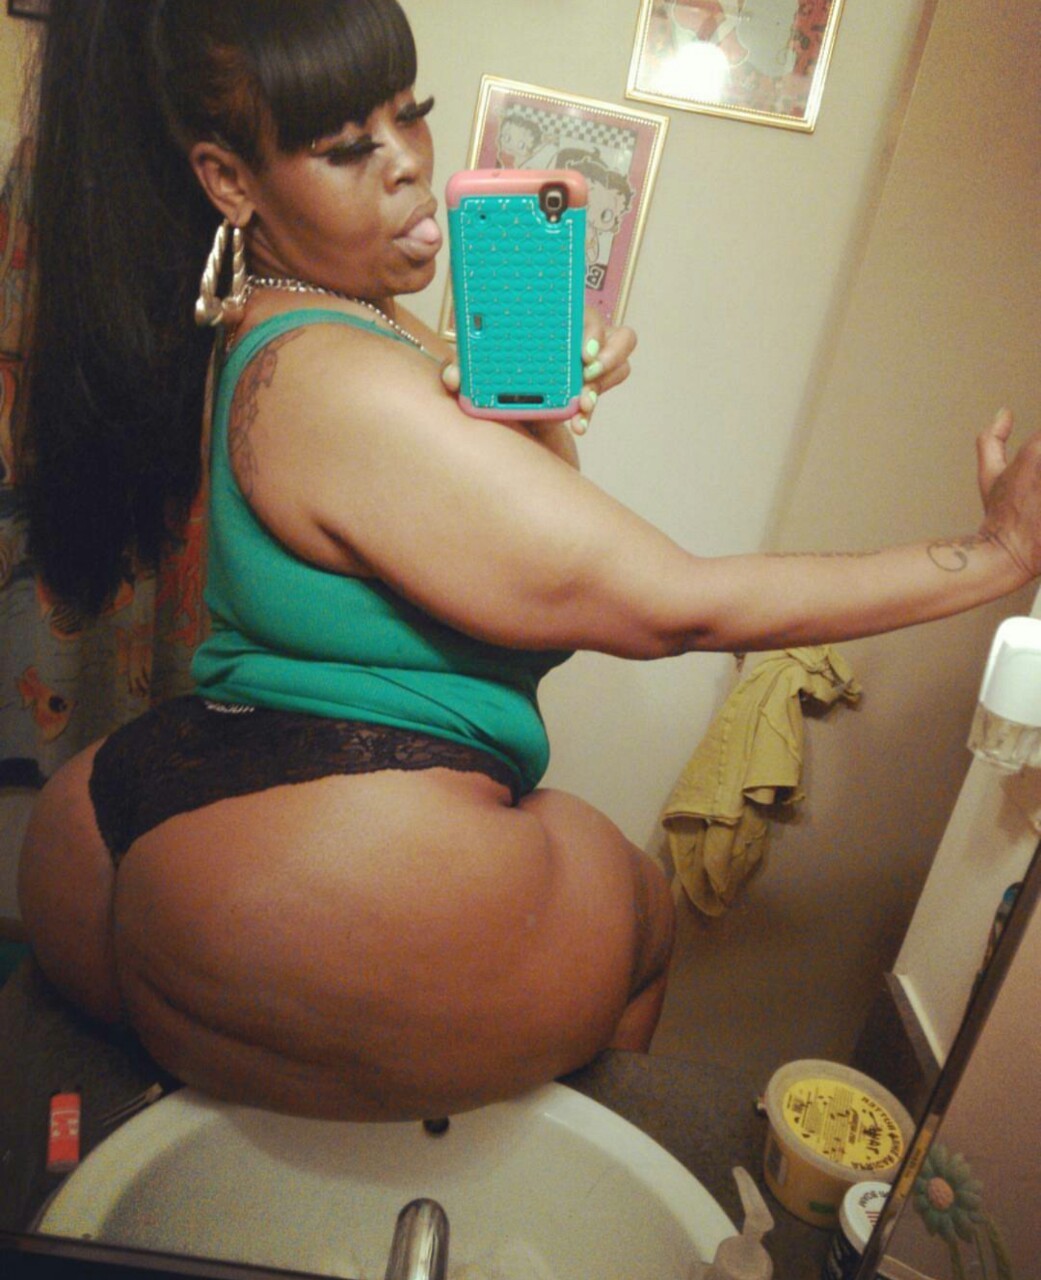 Bbw Lovers Pt11 Shesfreaky